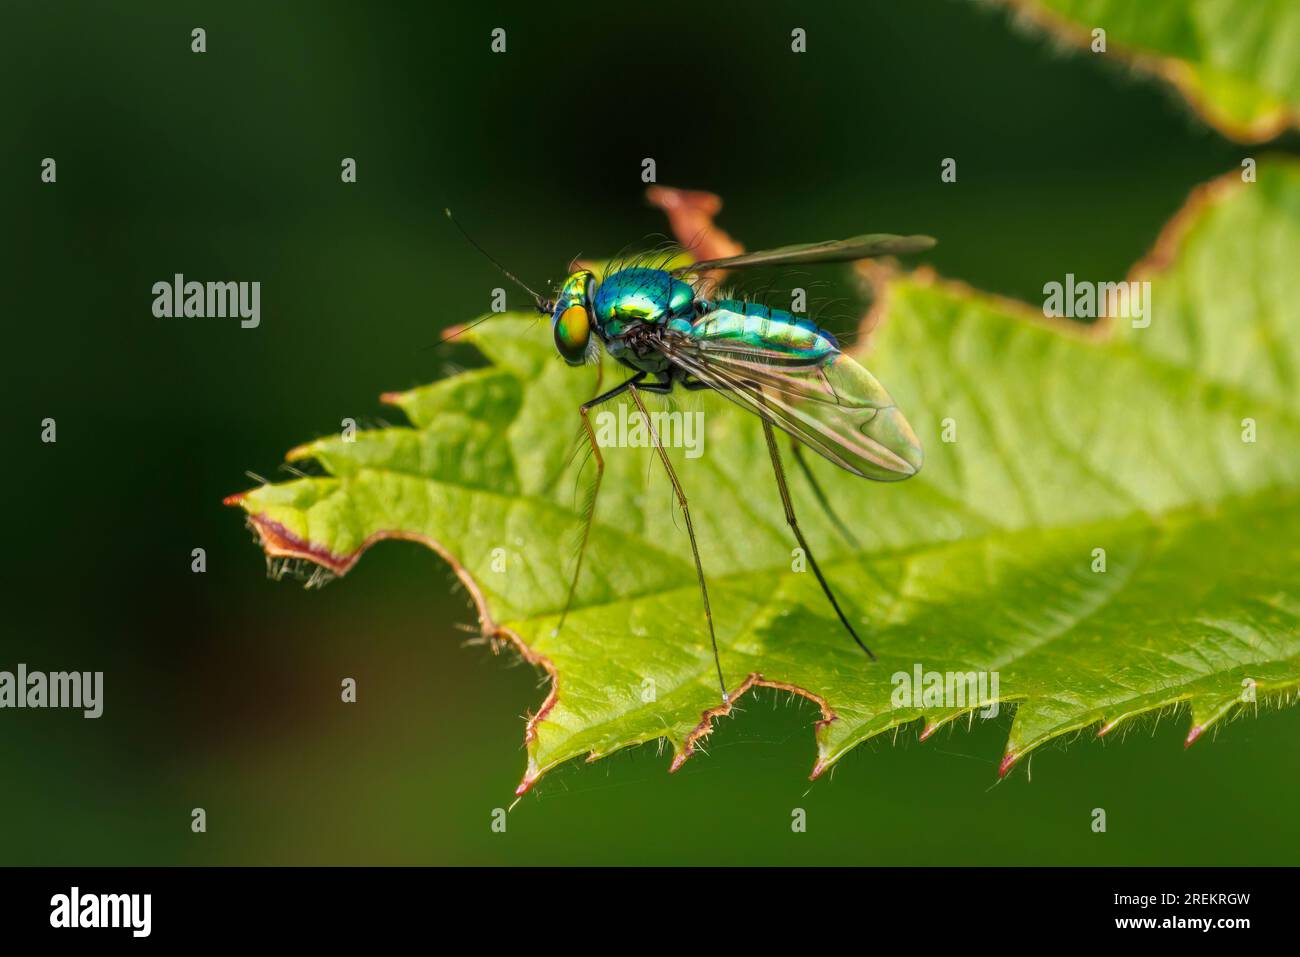 A male Long-legged Fly (Condylostylus sp.) of the comatus species group. Stock Photo